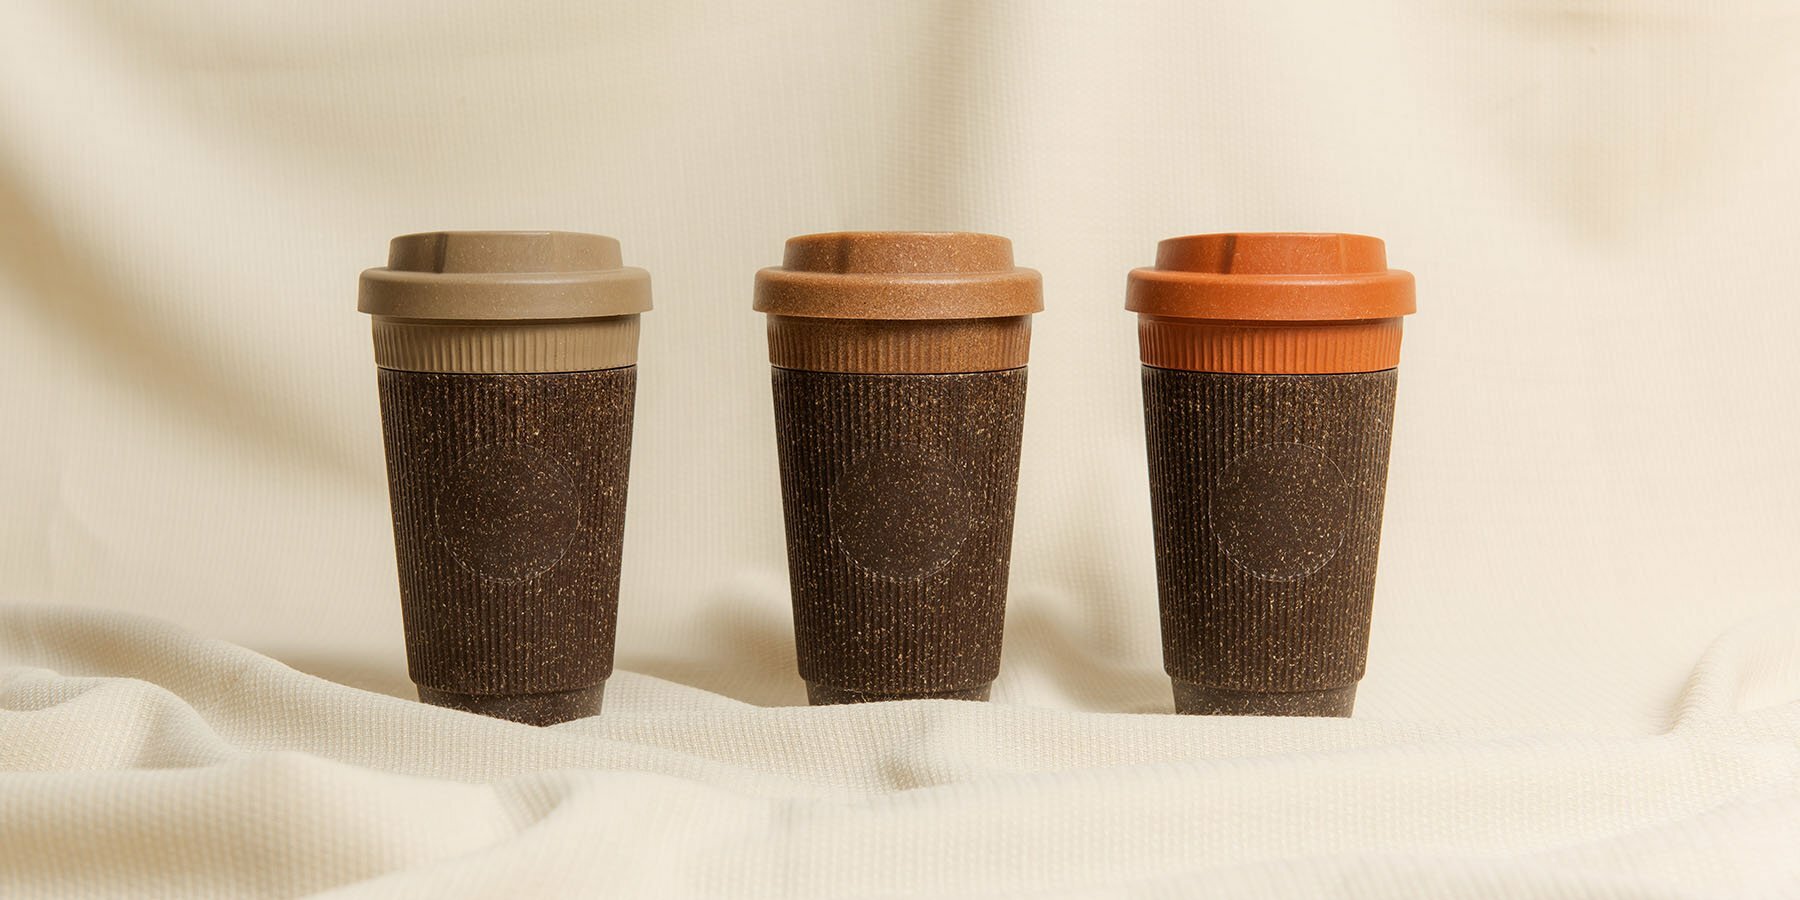 https://static.designboom.com/wp-content/uploads/2022/05/kaffeeform-launches-two-new-version-of-its-popular-travel-mug-weducer-cup-made-from-repurposed-waste-materials-3-627a5f7813cb3.jpg